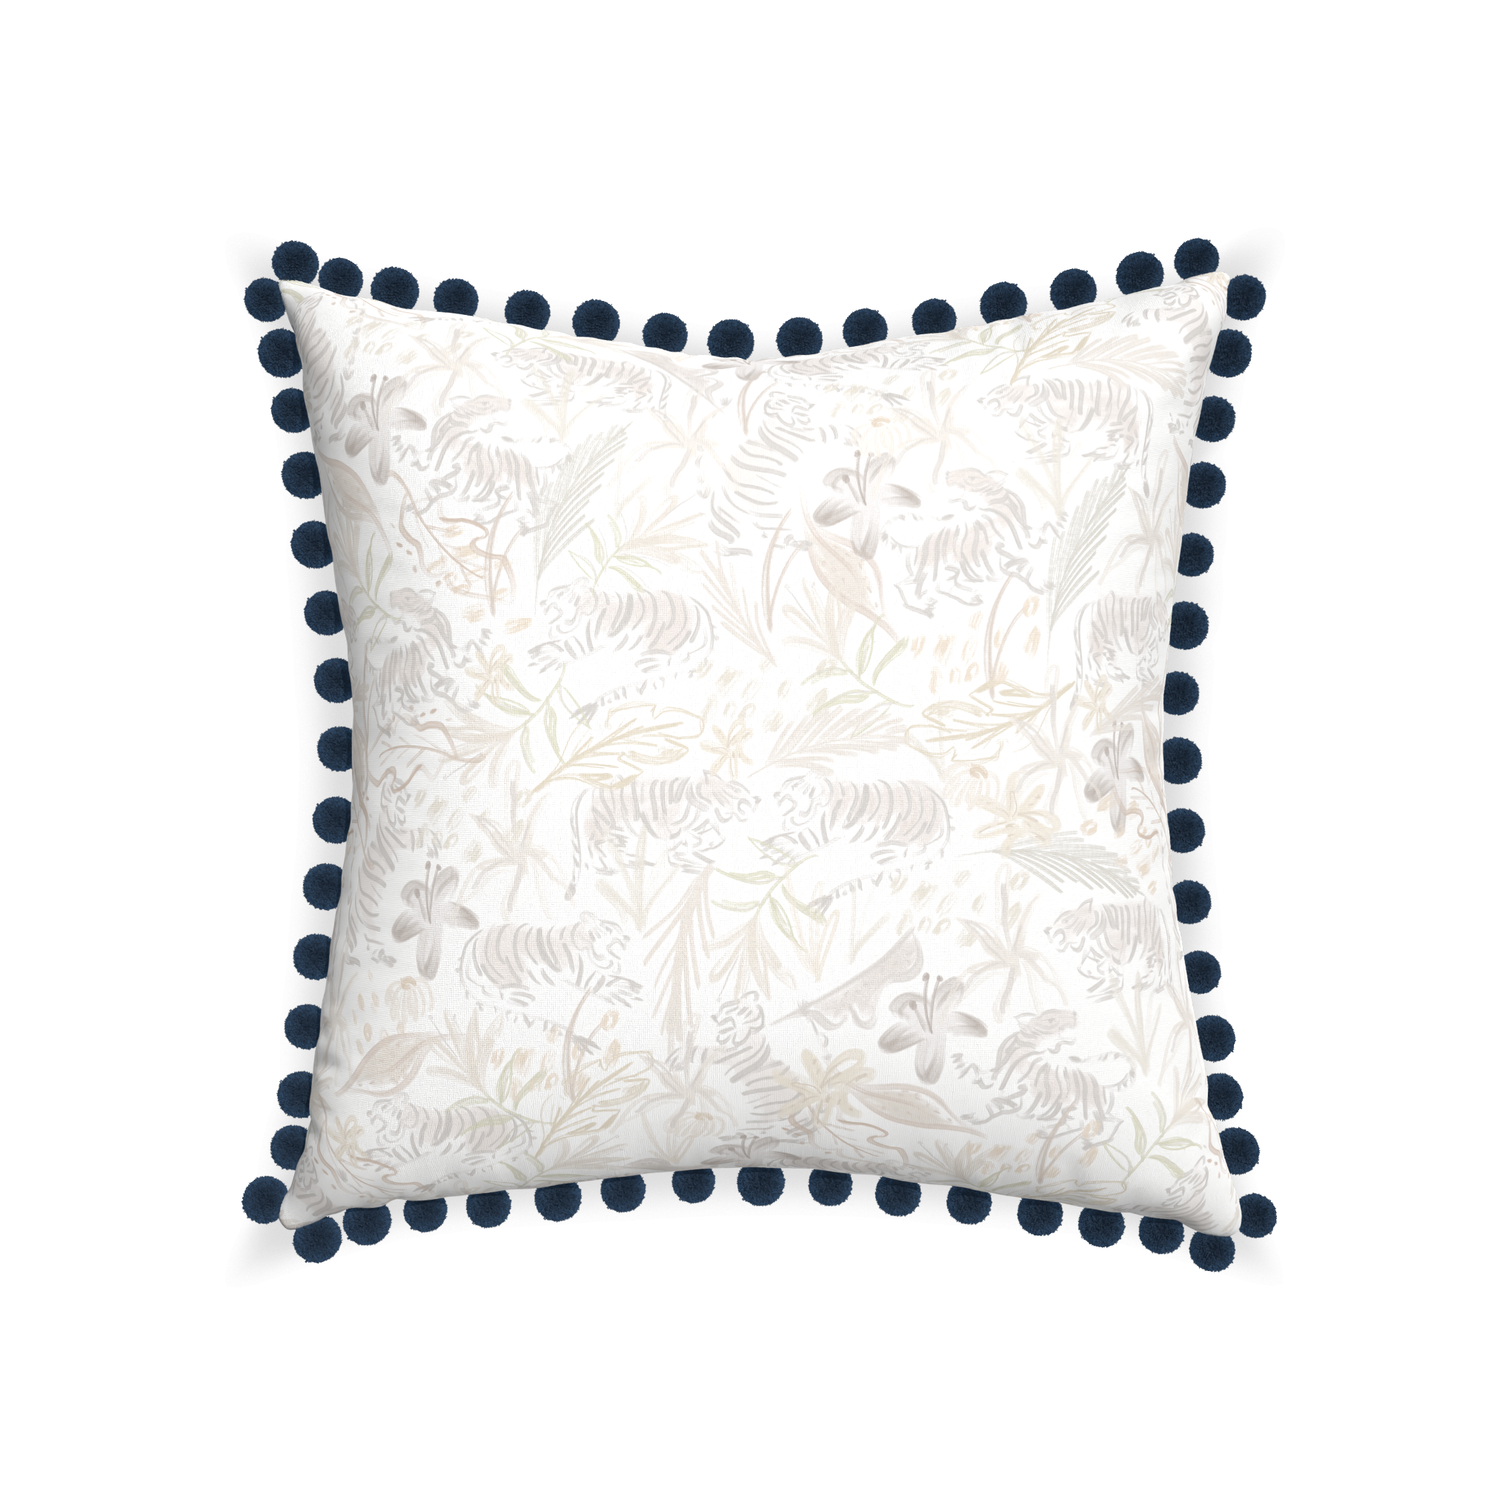 22-square frida sand custom beige chinoiserie tigerpillow with c on white background